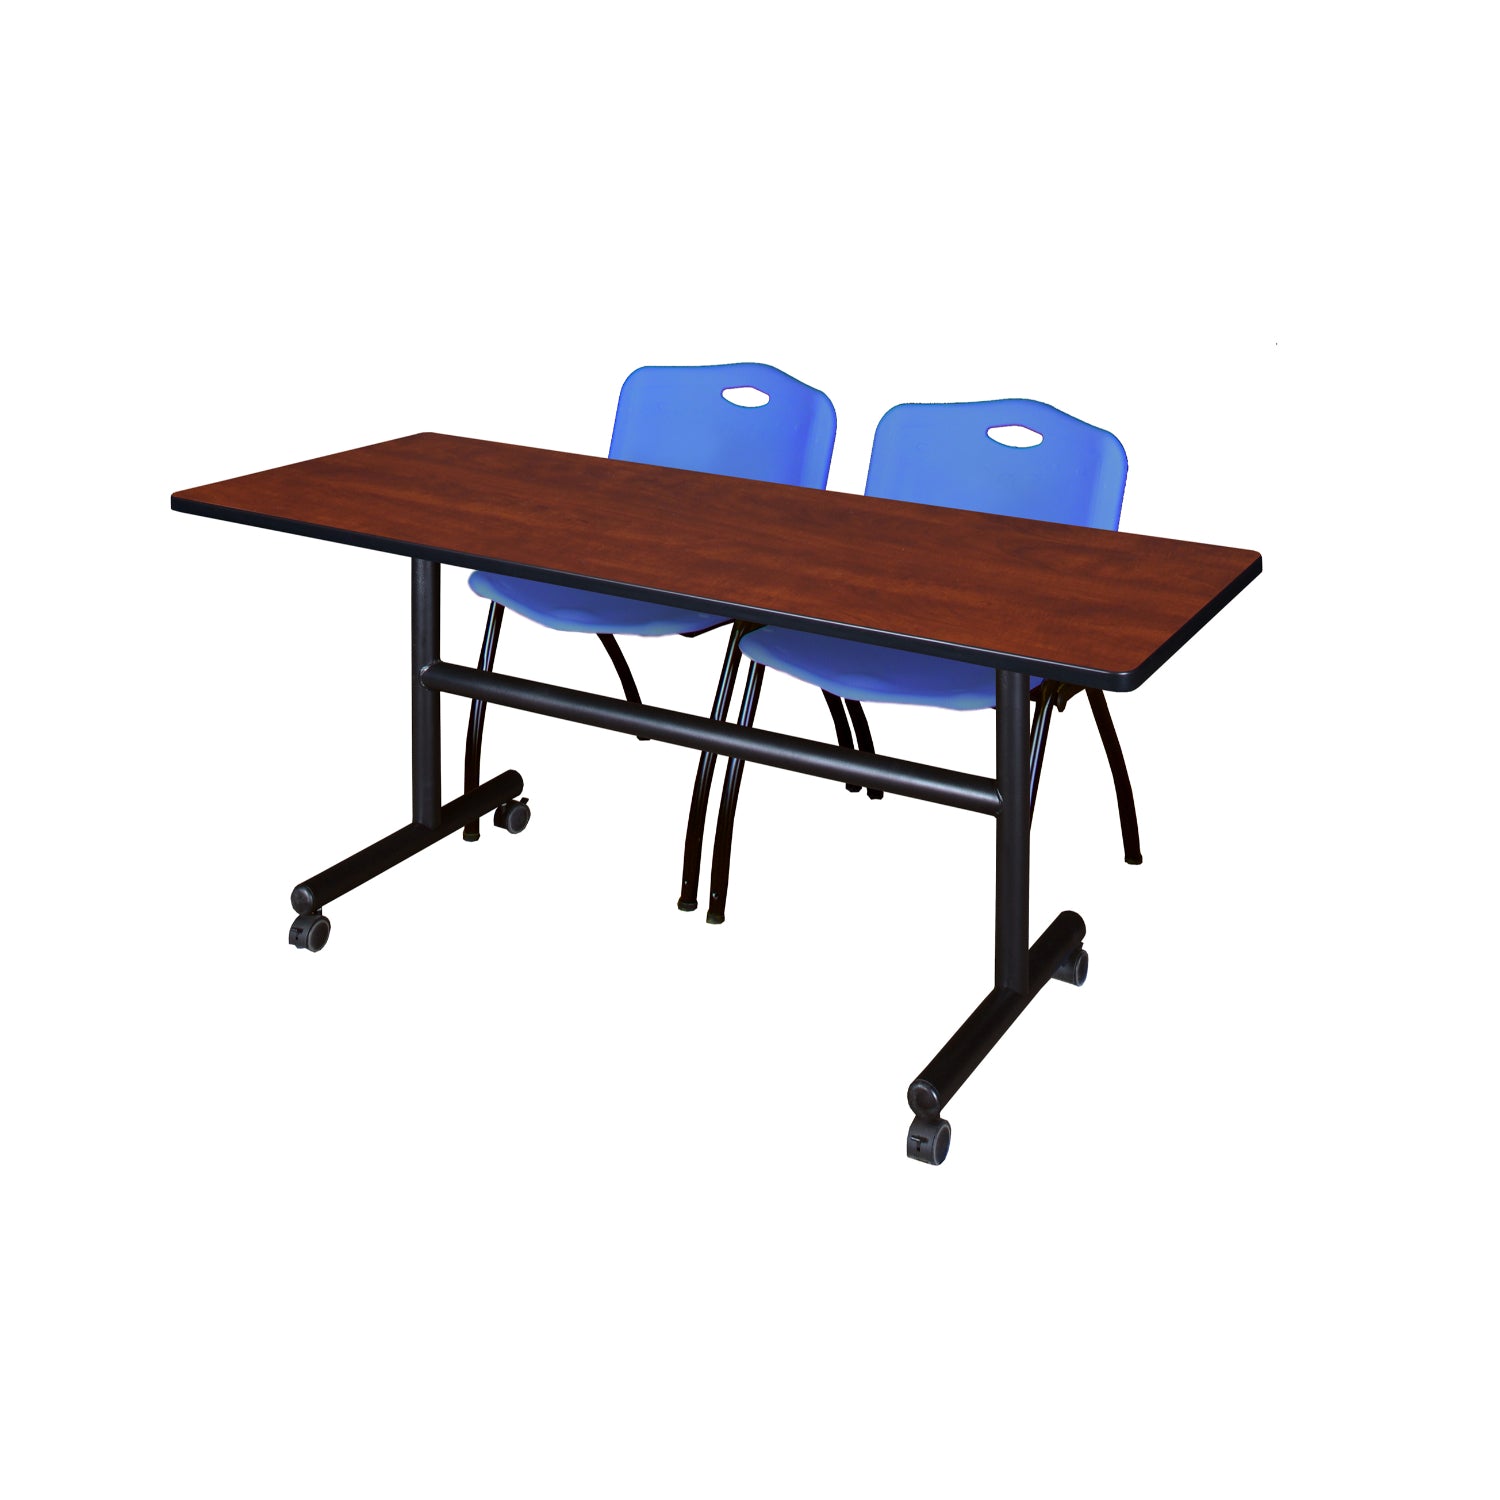 Kobe Flip Top Training Table and Chair Package, Kobe 60" x 30" Flip Top Mobile Nesting Table with 2 "M" Stack Chairs